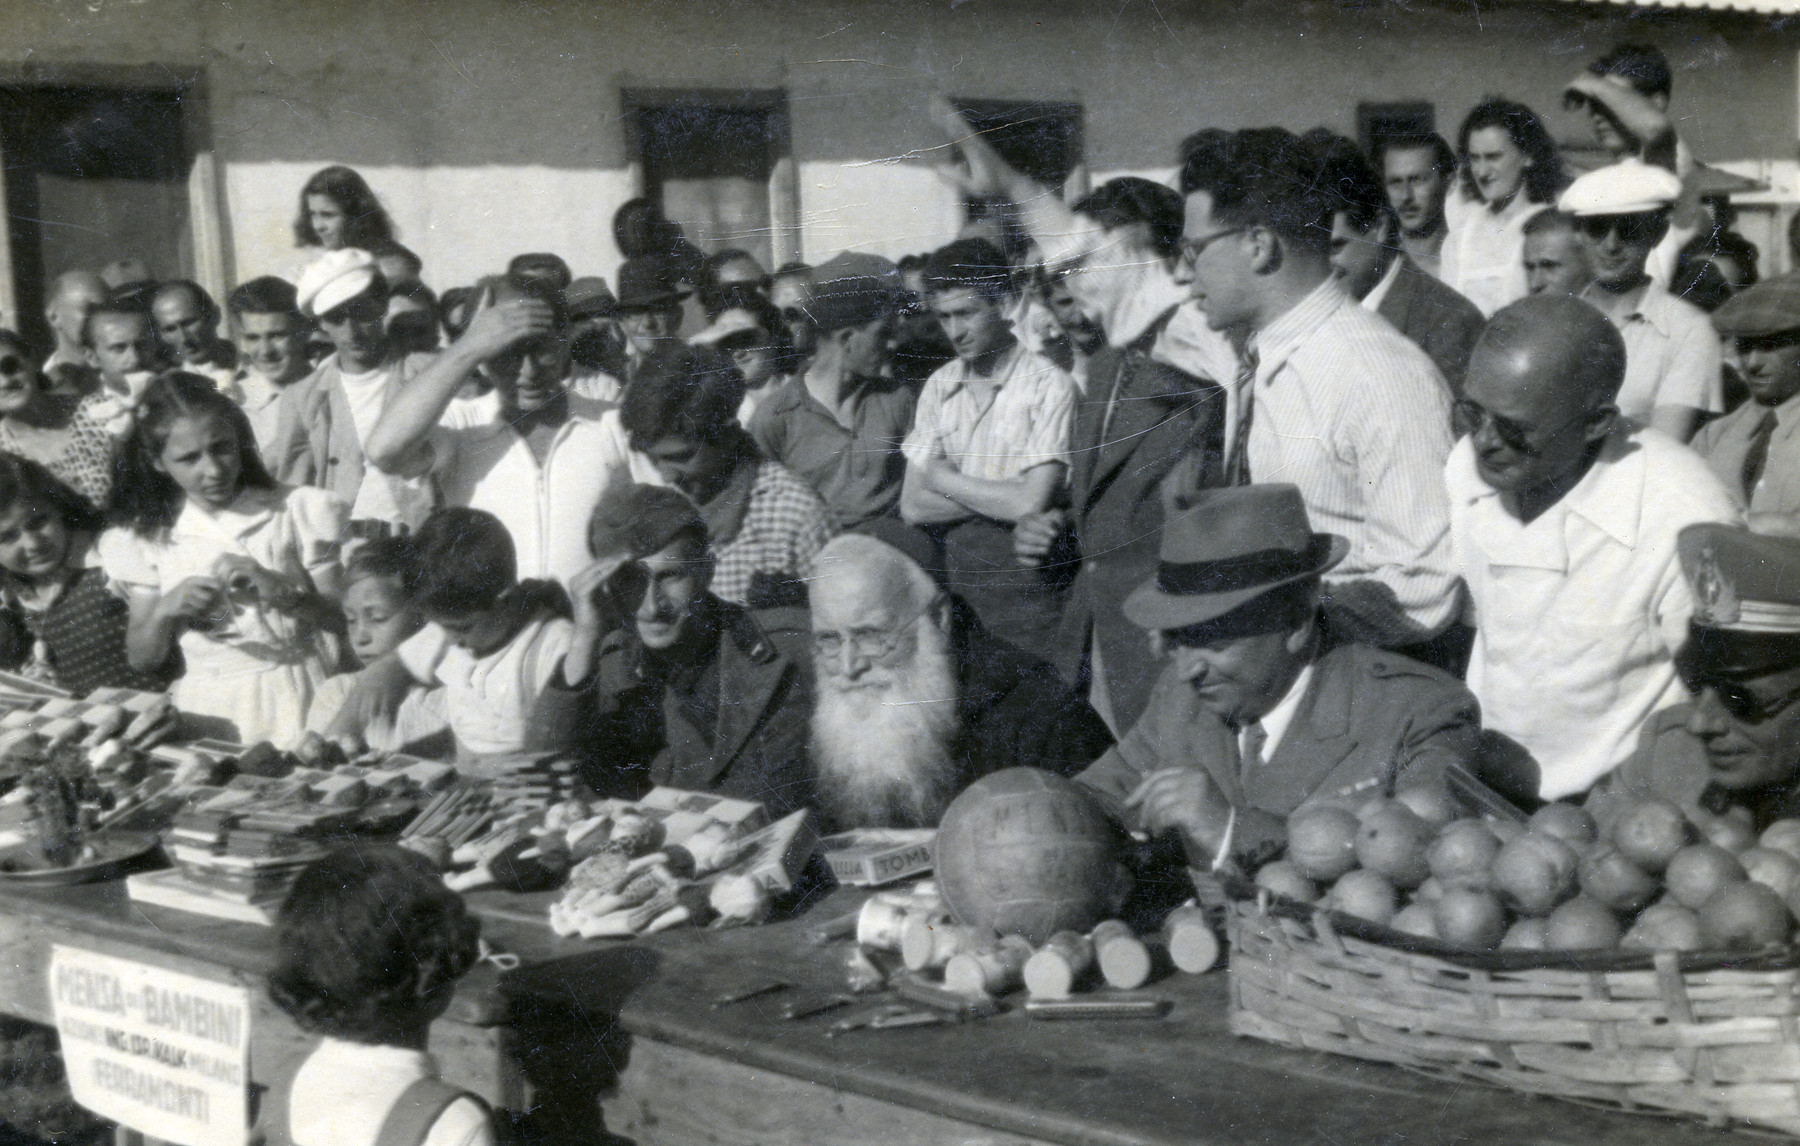 Internees at Ferramonti gather by a table displaying various goods.